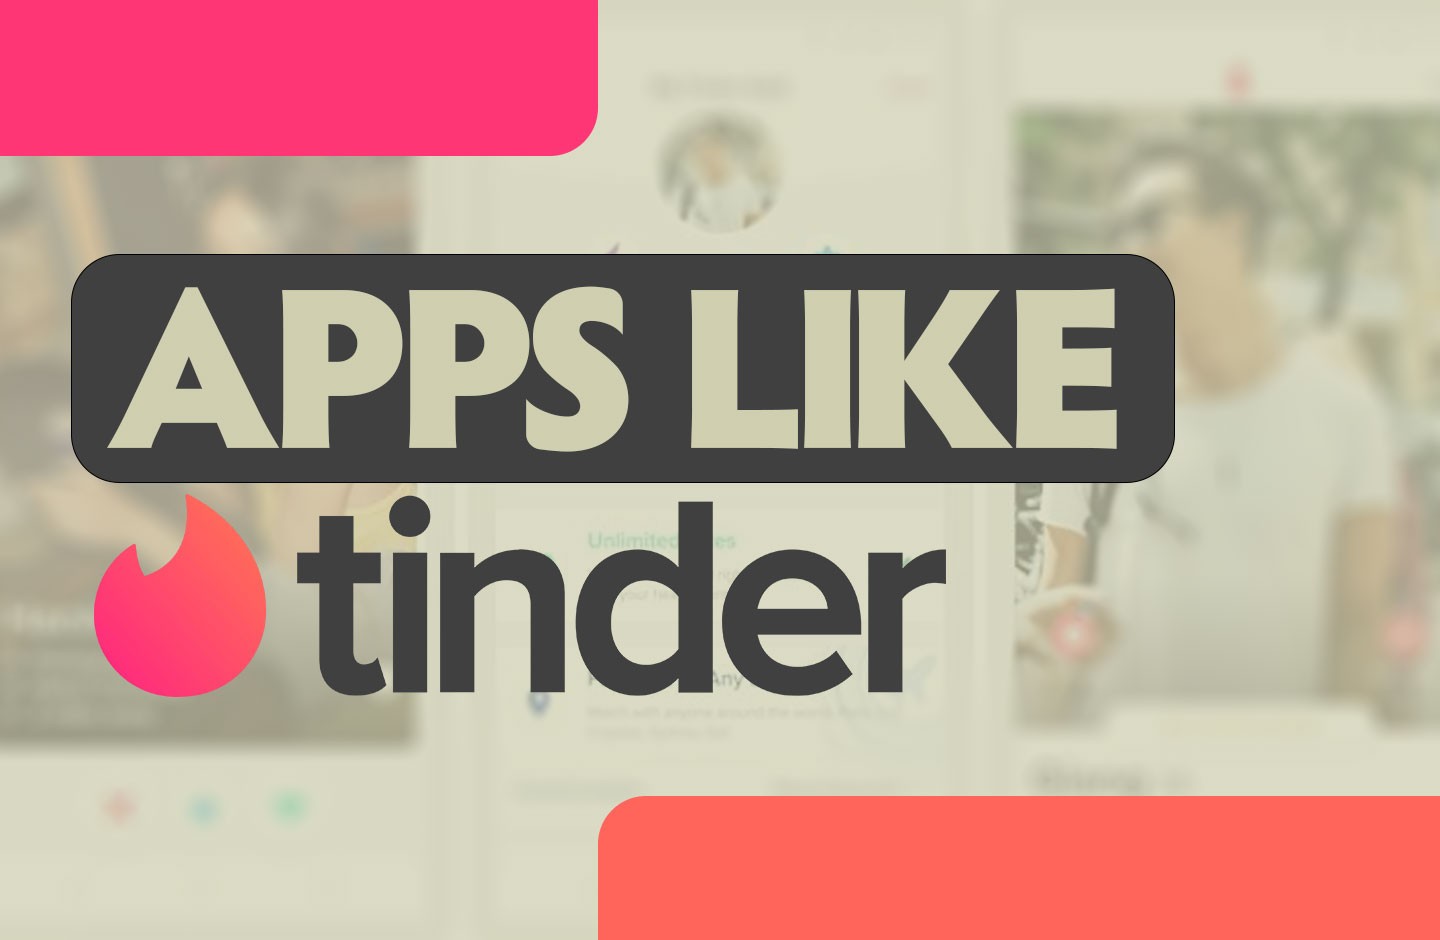 Tinder related apps